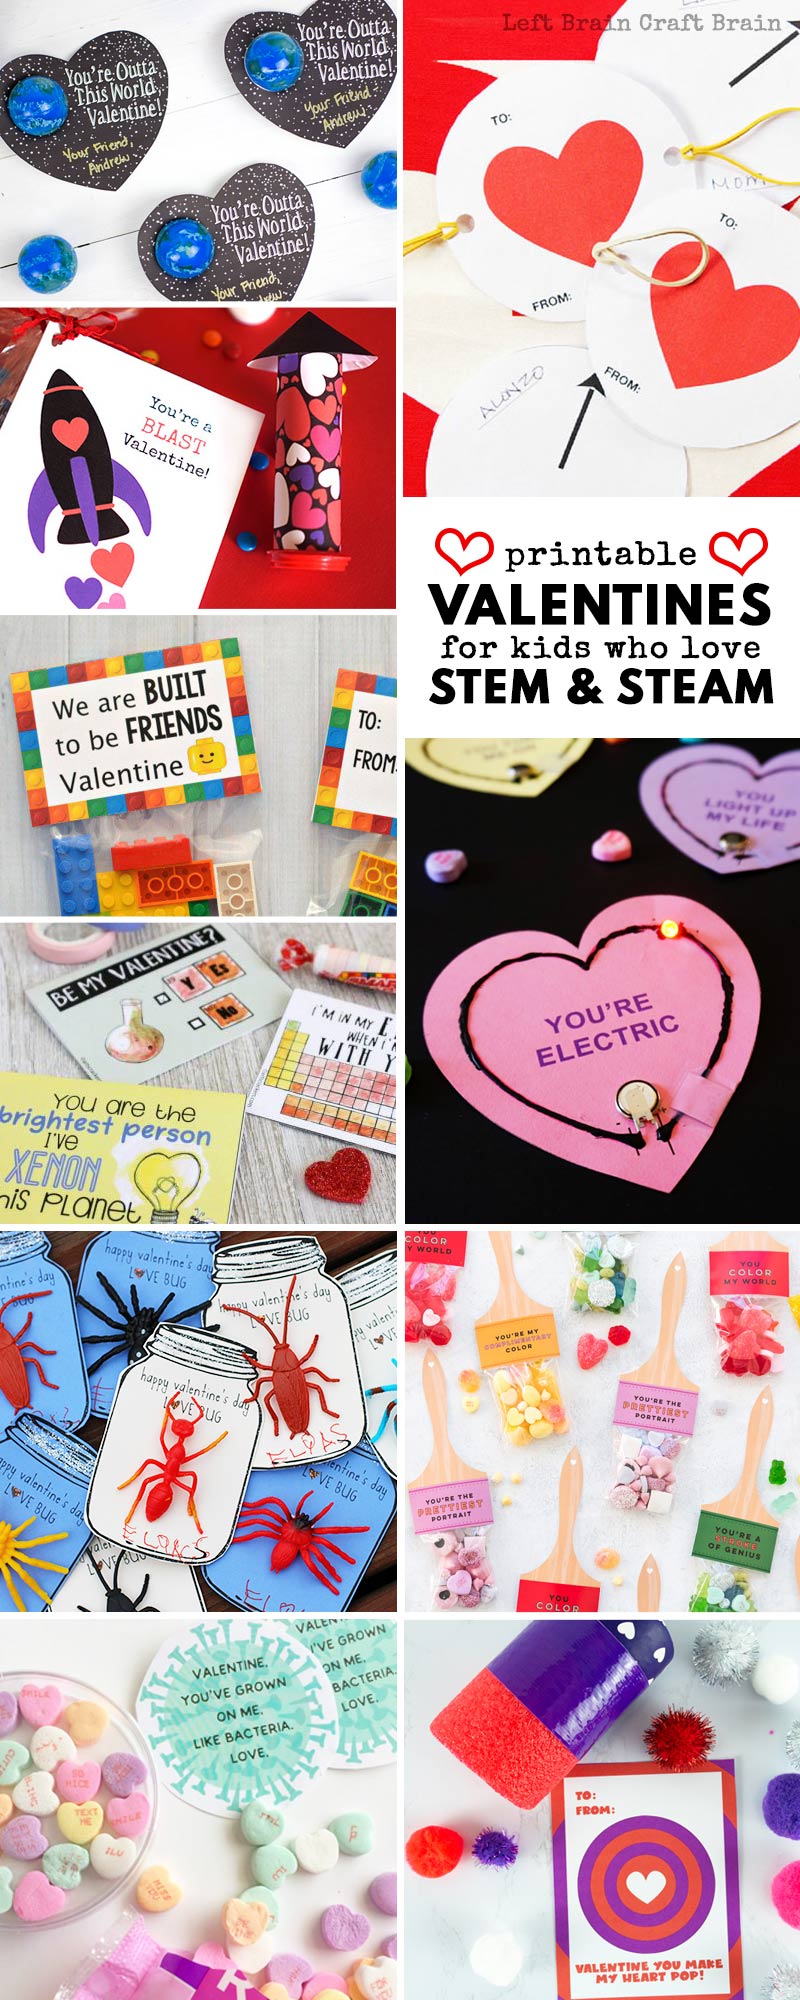 Show your love for STEM and STEAM (science, technology, engineering, art, and math) with these cool (and free) printable Valentine cards. Printable Valentines make celebrating Valentine's Day super easy and fun.